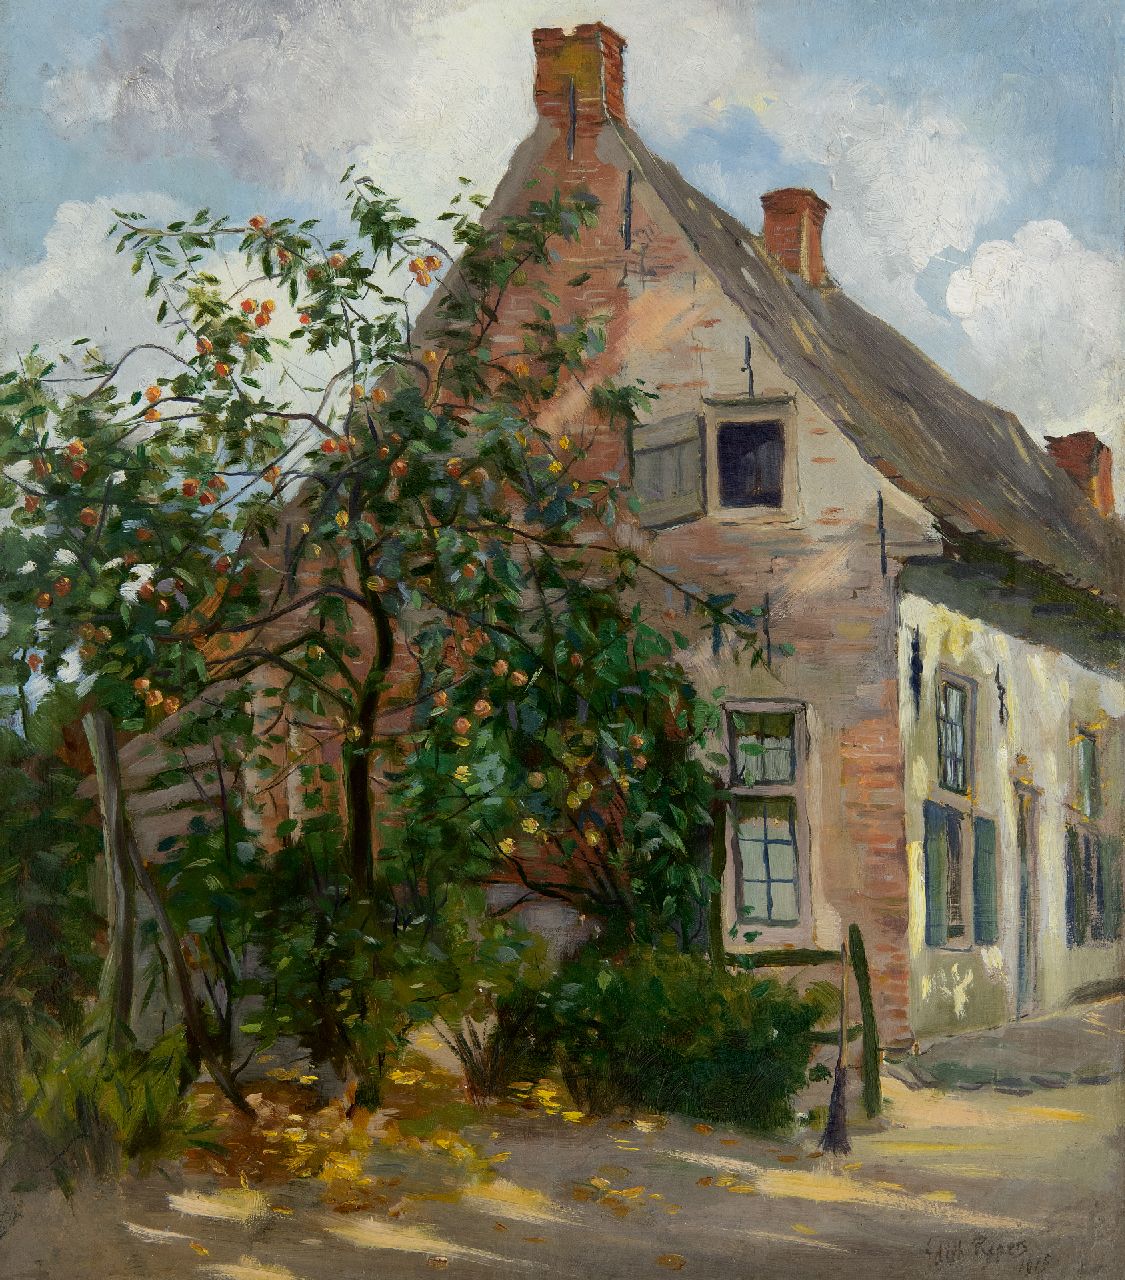 Pijpers E.E.  | 'Edith' Elizabeth Pijpers | Paintings offered for sale | Apple tree near a house, oil on canvas 45.2 x 40.4 cm, signed l.r. and dated 1915